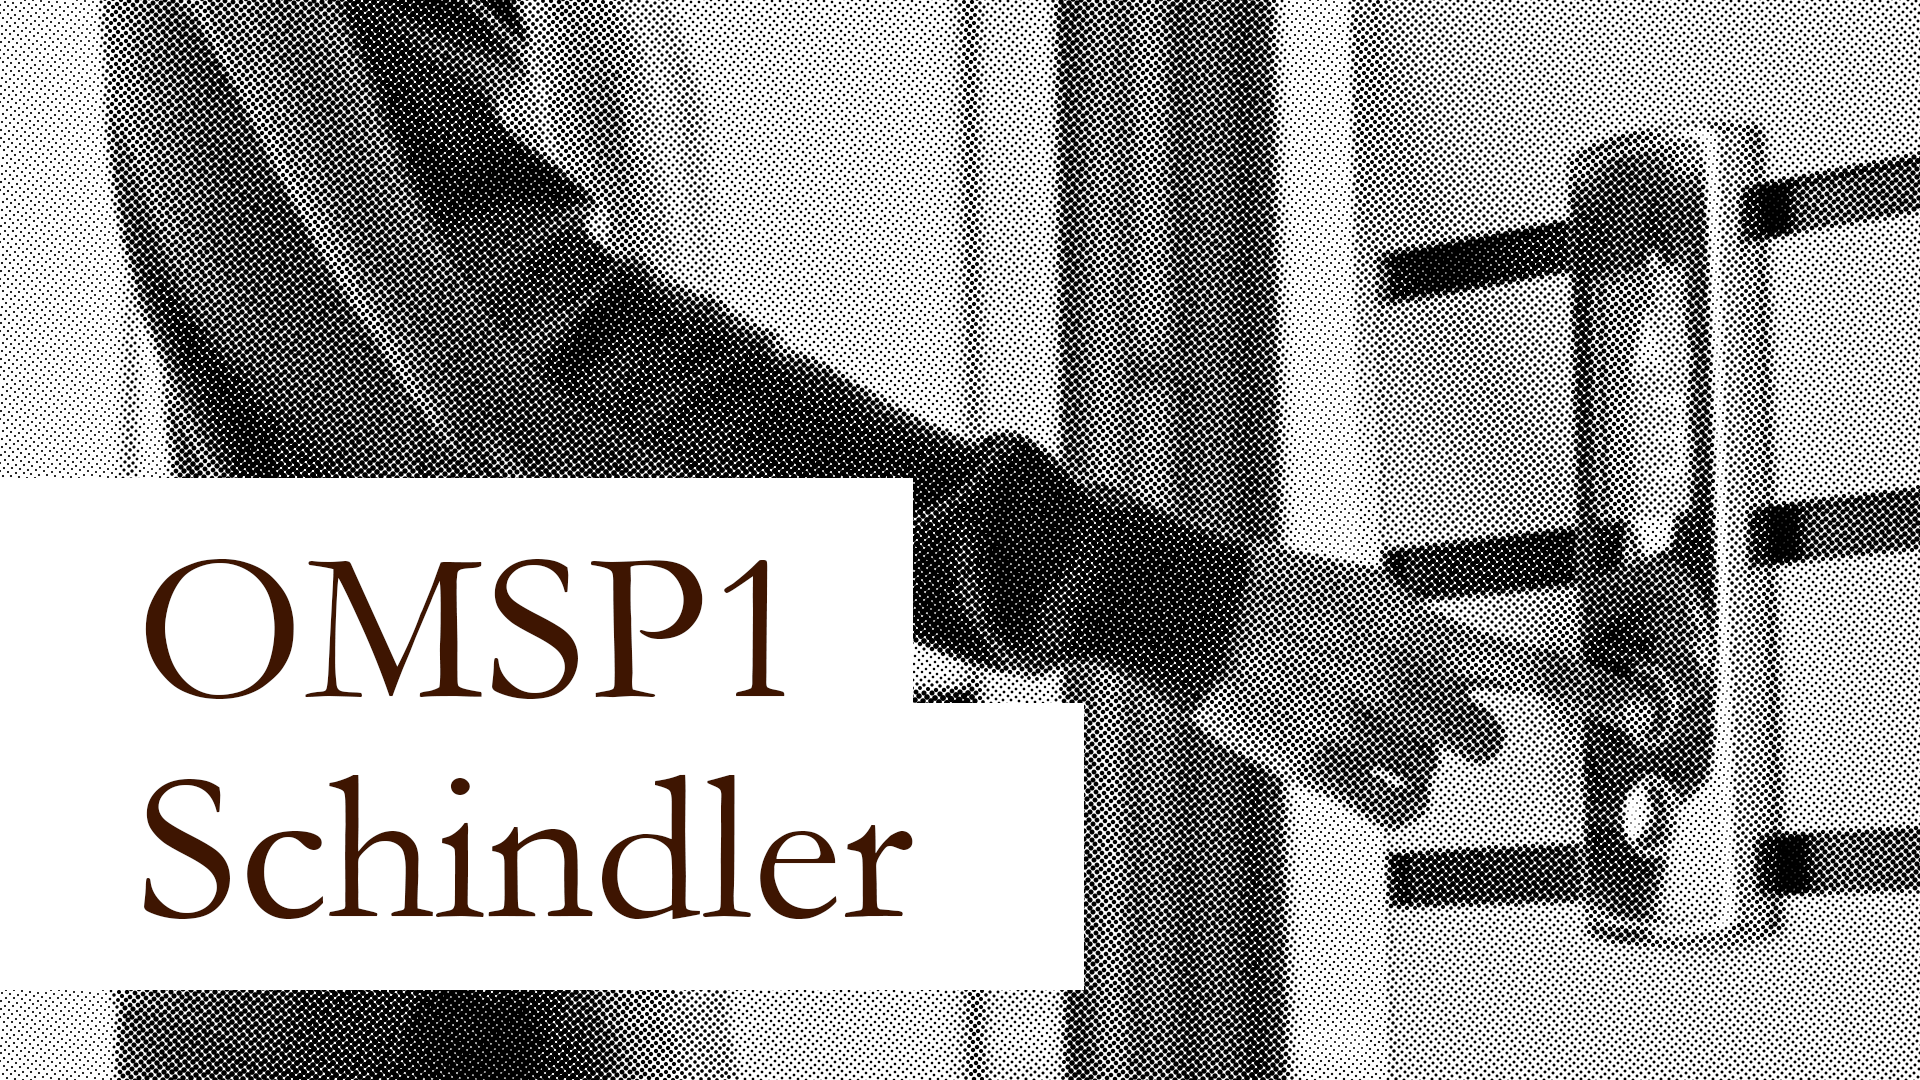 Elevating the OMSP1 with Schindler